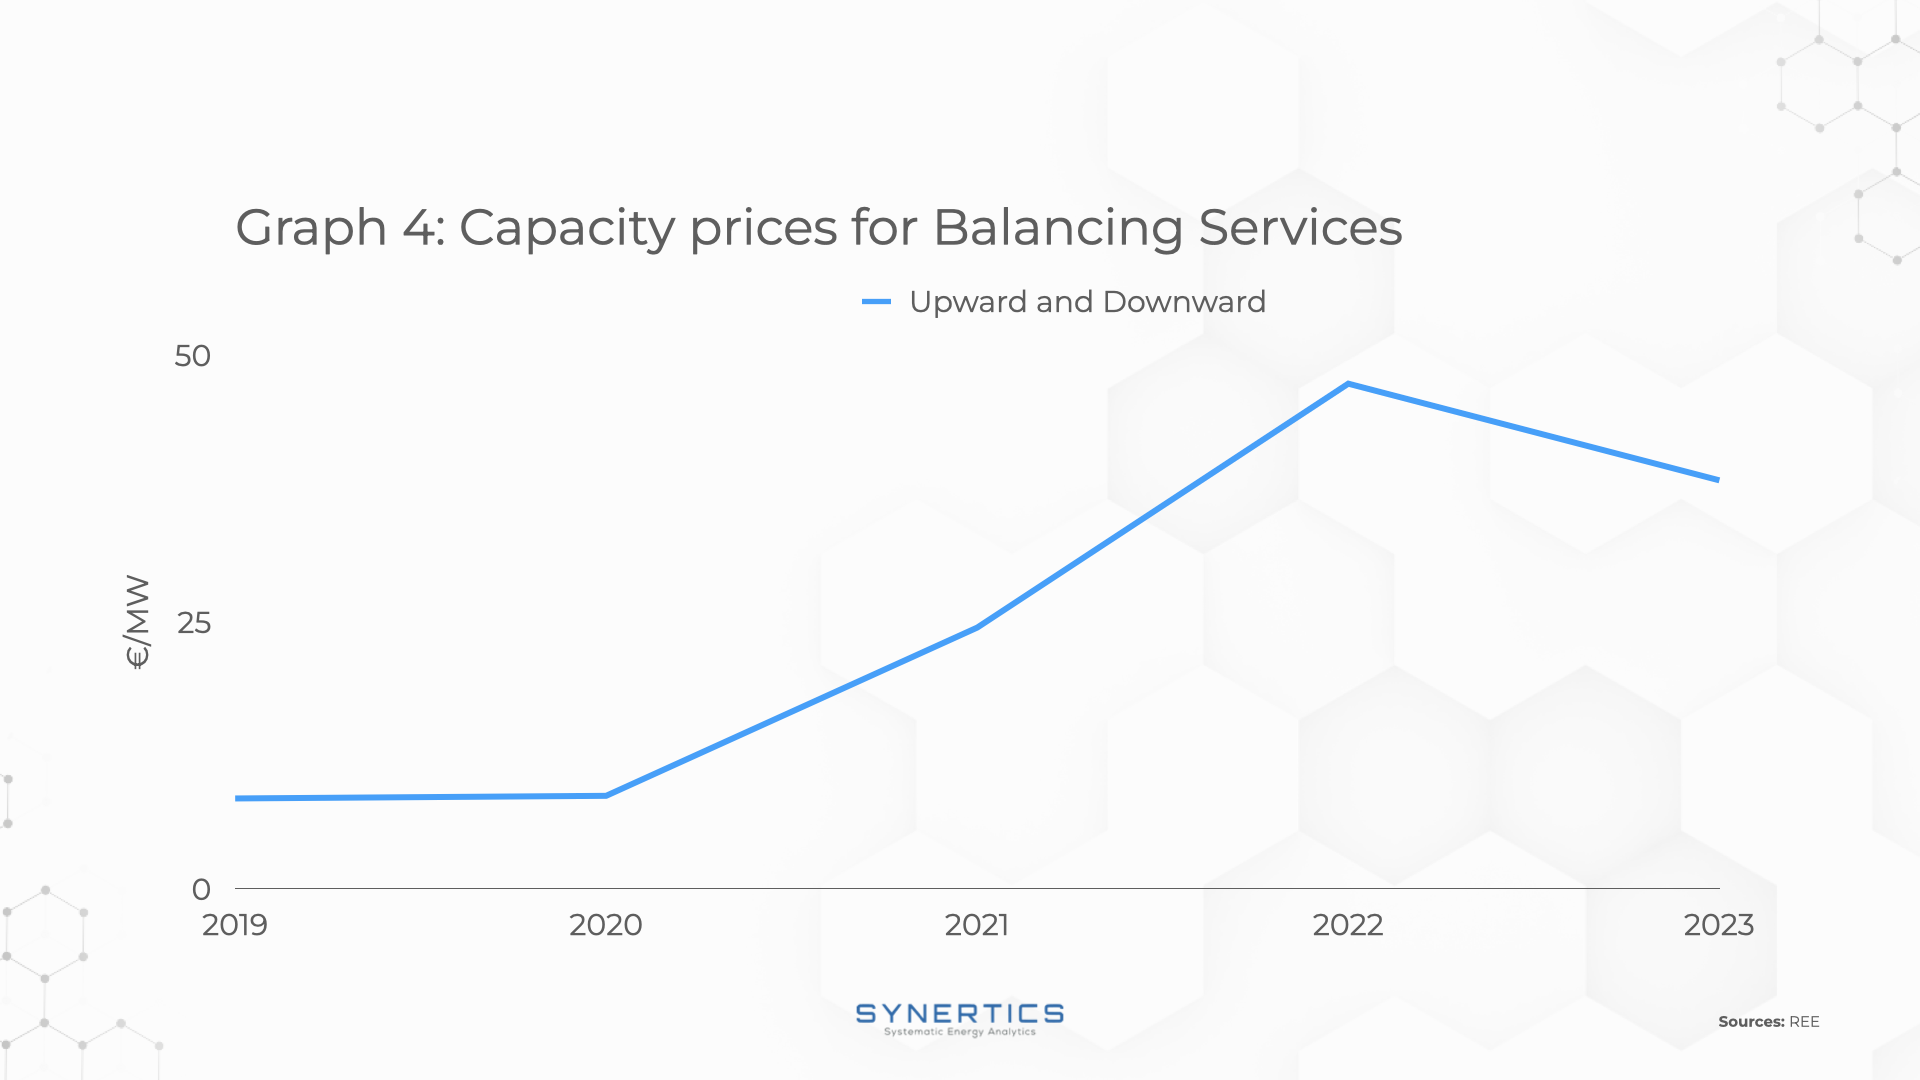 Capacity prices for Balancing Services in Spain